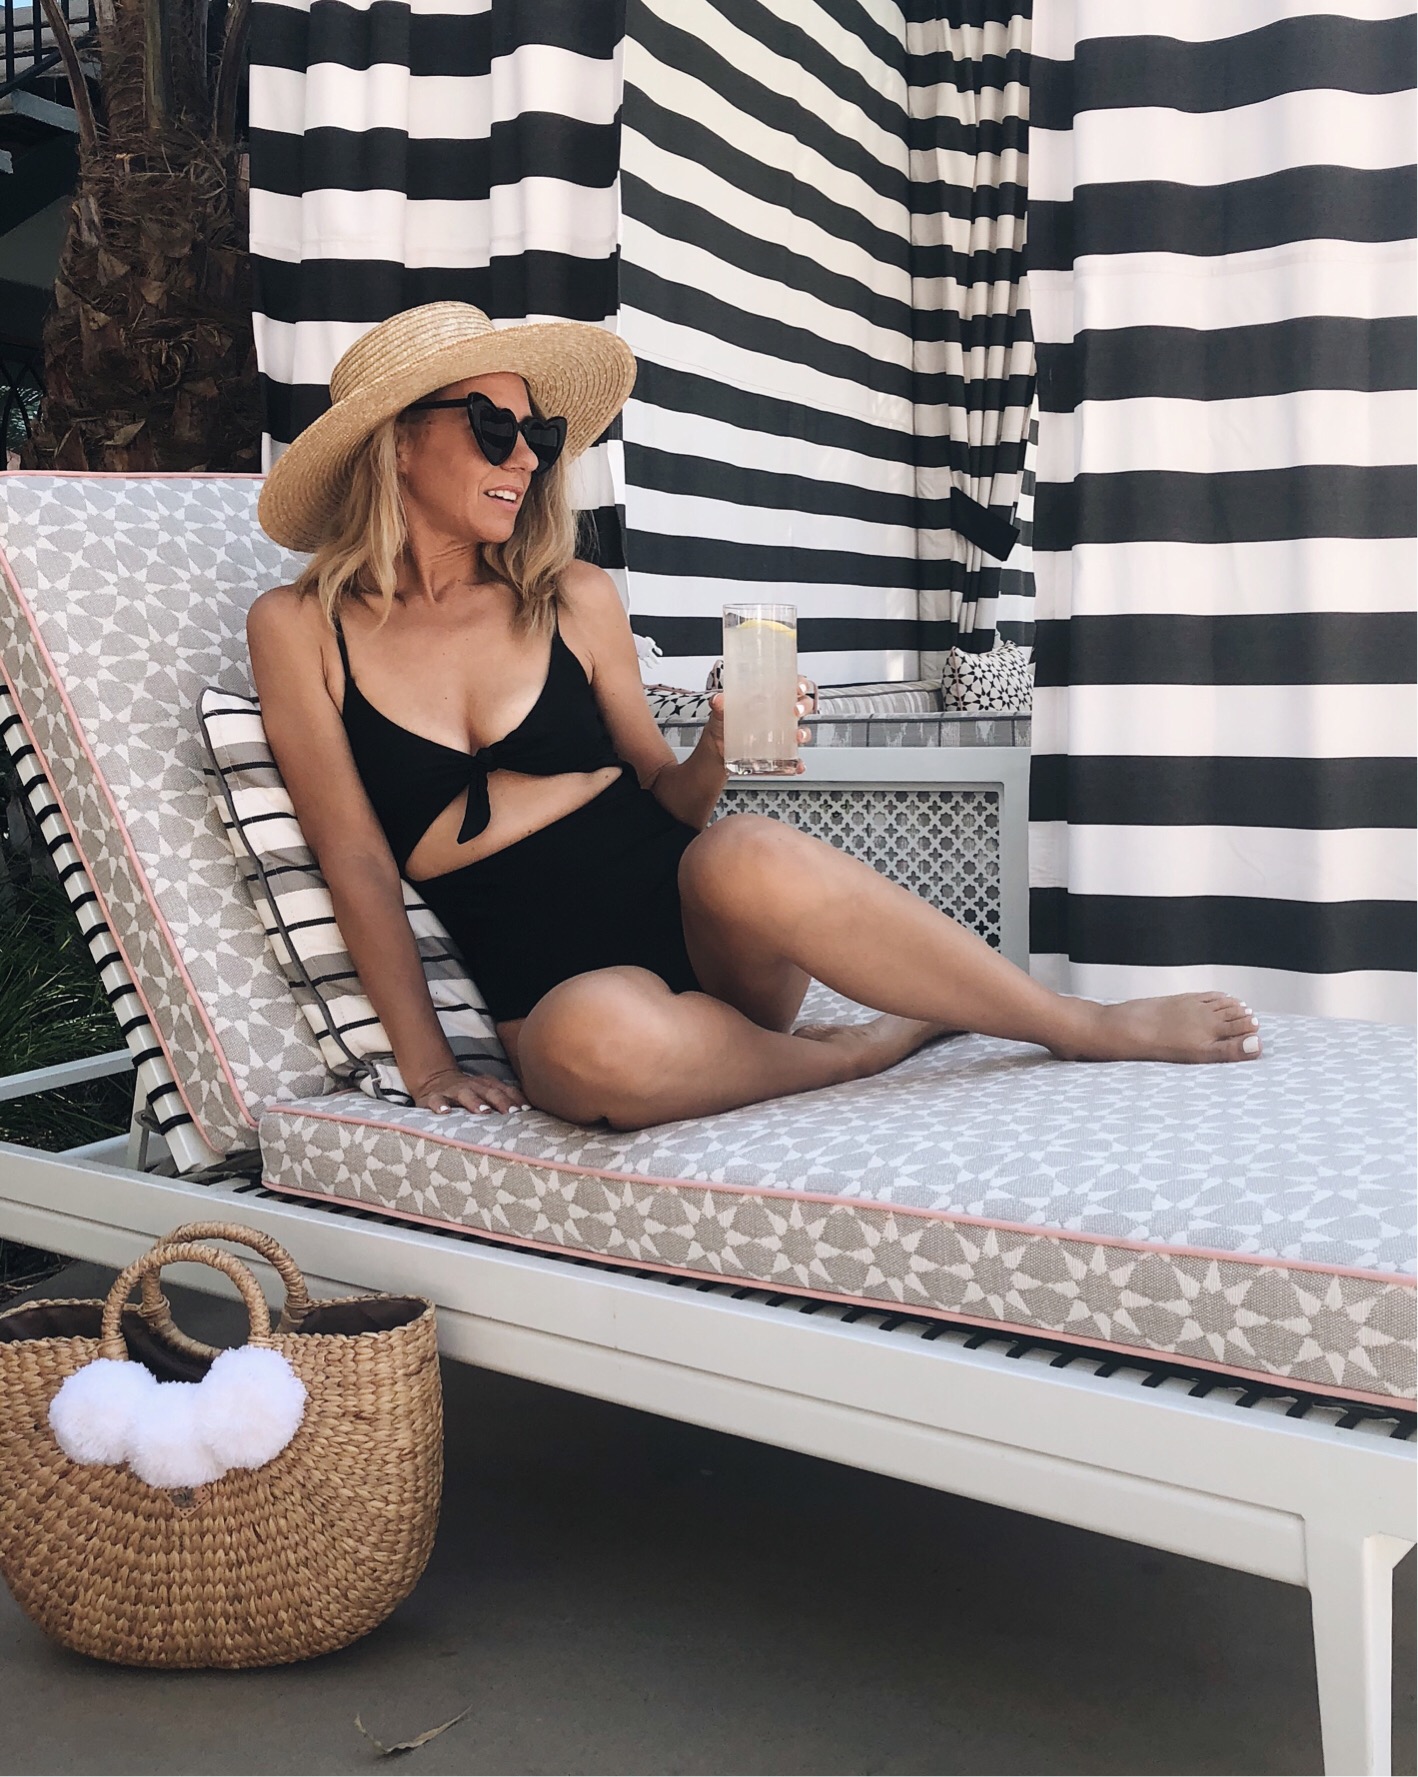 ANNIVERSARY WEEKEND GETAWAY AT THE SANDS HOTEL- Jaclyn De Leon Style + PALM SPRINGS HOTEL + BOHEMIAN + ONE PIECE SWIMSUIT + RETRO SUNGLASSES + CABANA AT THE POOL + RETRO STYLE SWIMSUIT + SUMMER STYLE + VACATION + TRAVEL